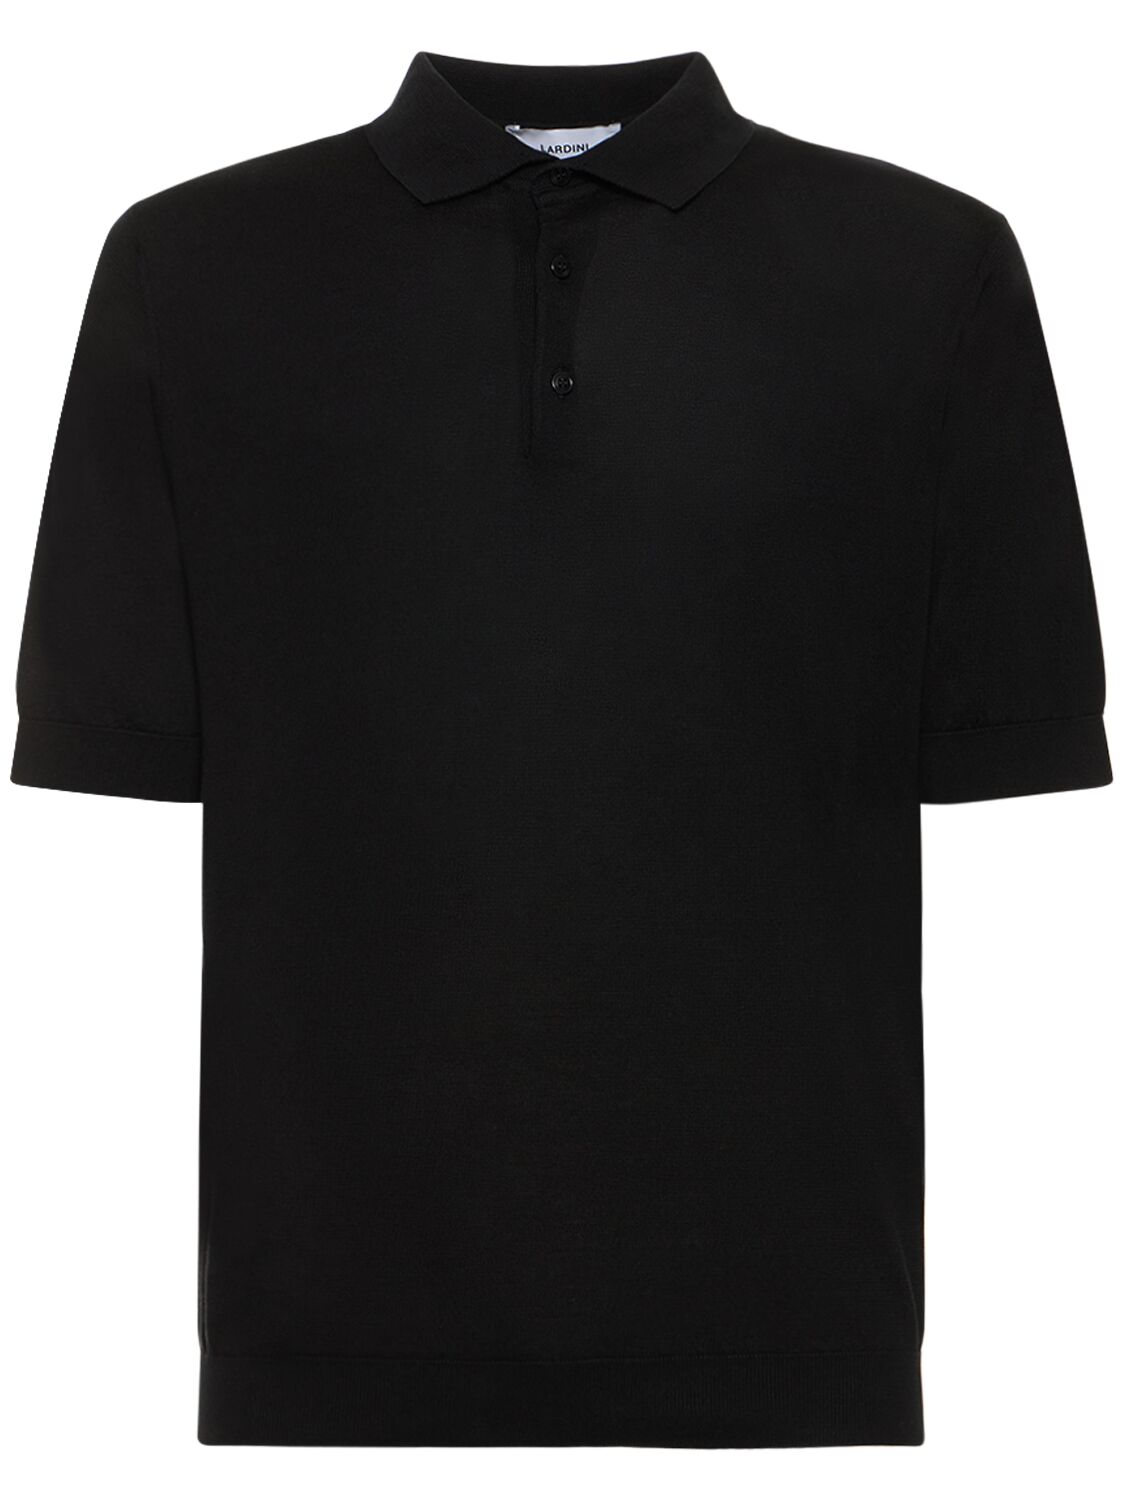 Image of Cotton Knit Polo